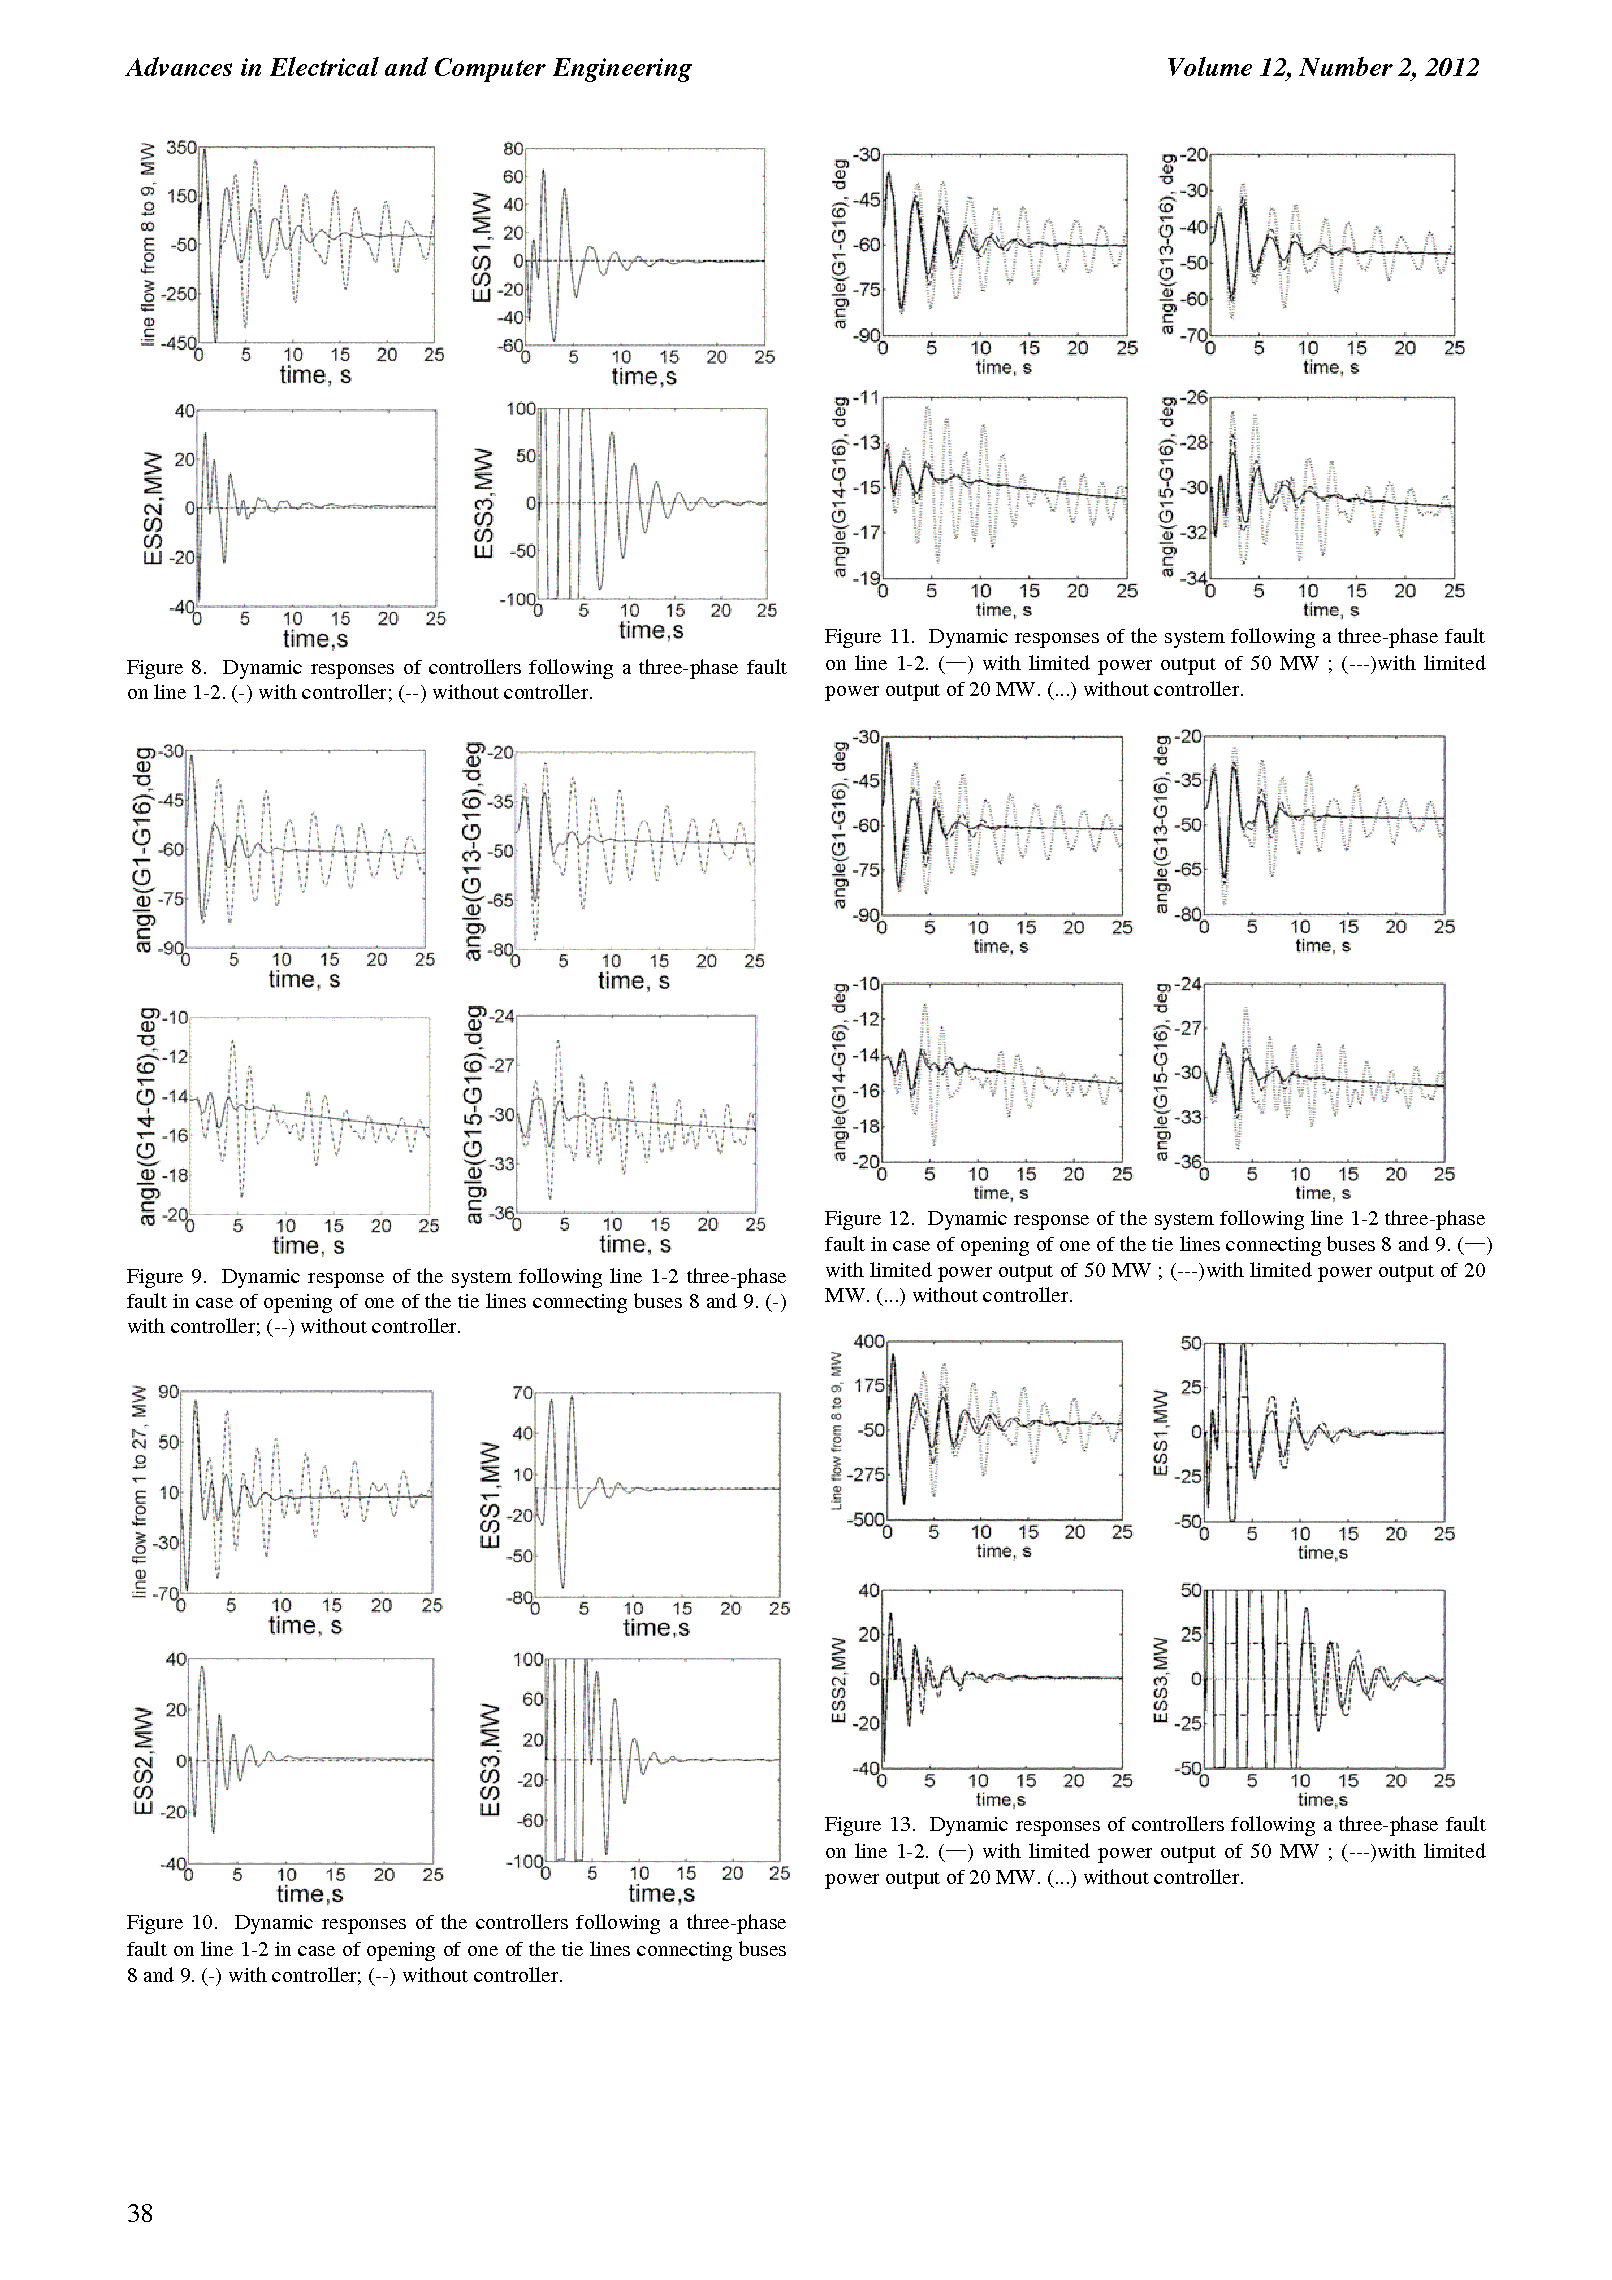 PDF Quickview for paper with DOI:10.4316/AECE.2012.02006